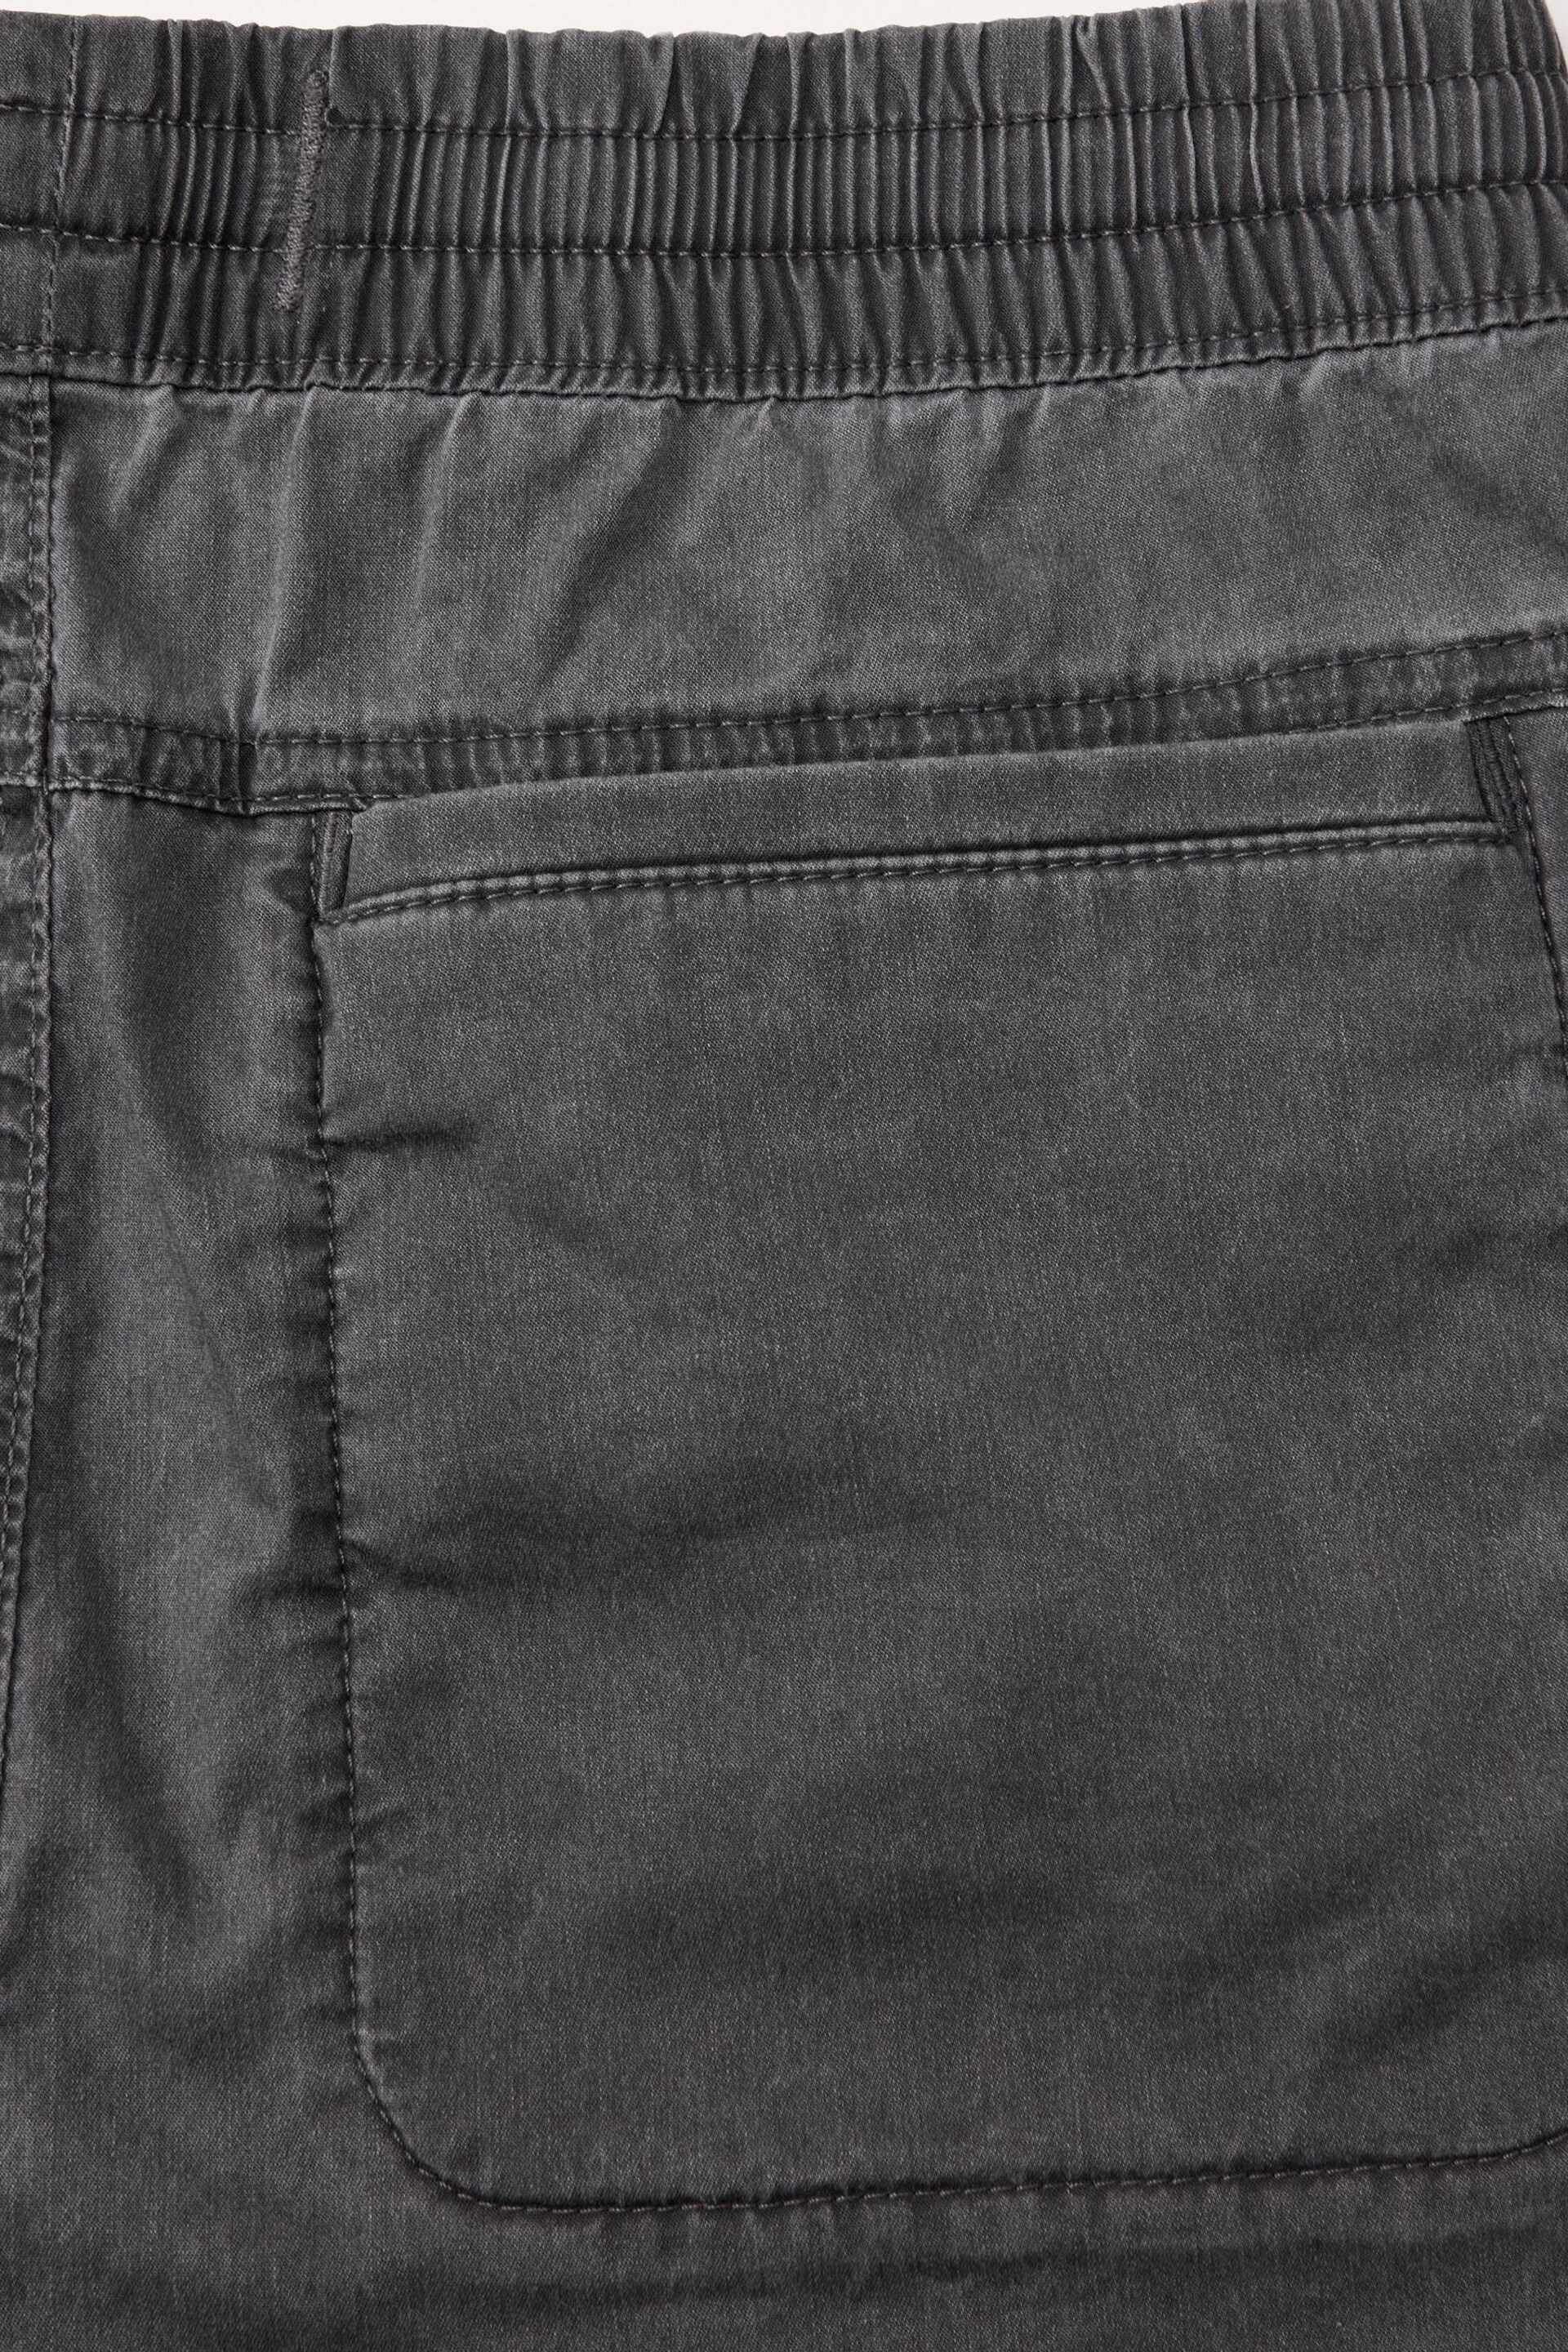 Abercrombie & Fitch Utility Cargo Black Trousers - Image 6 of 6